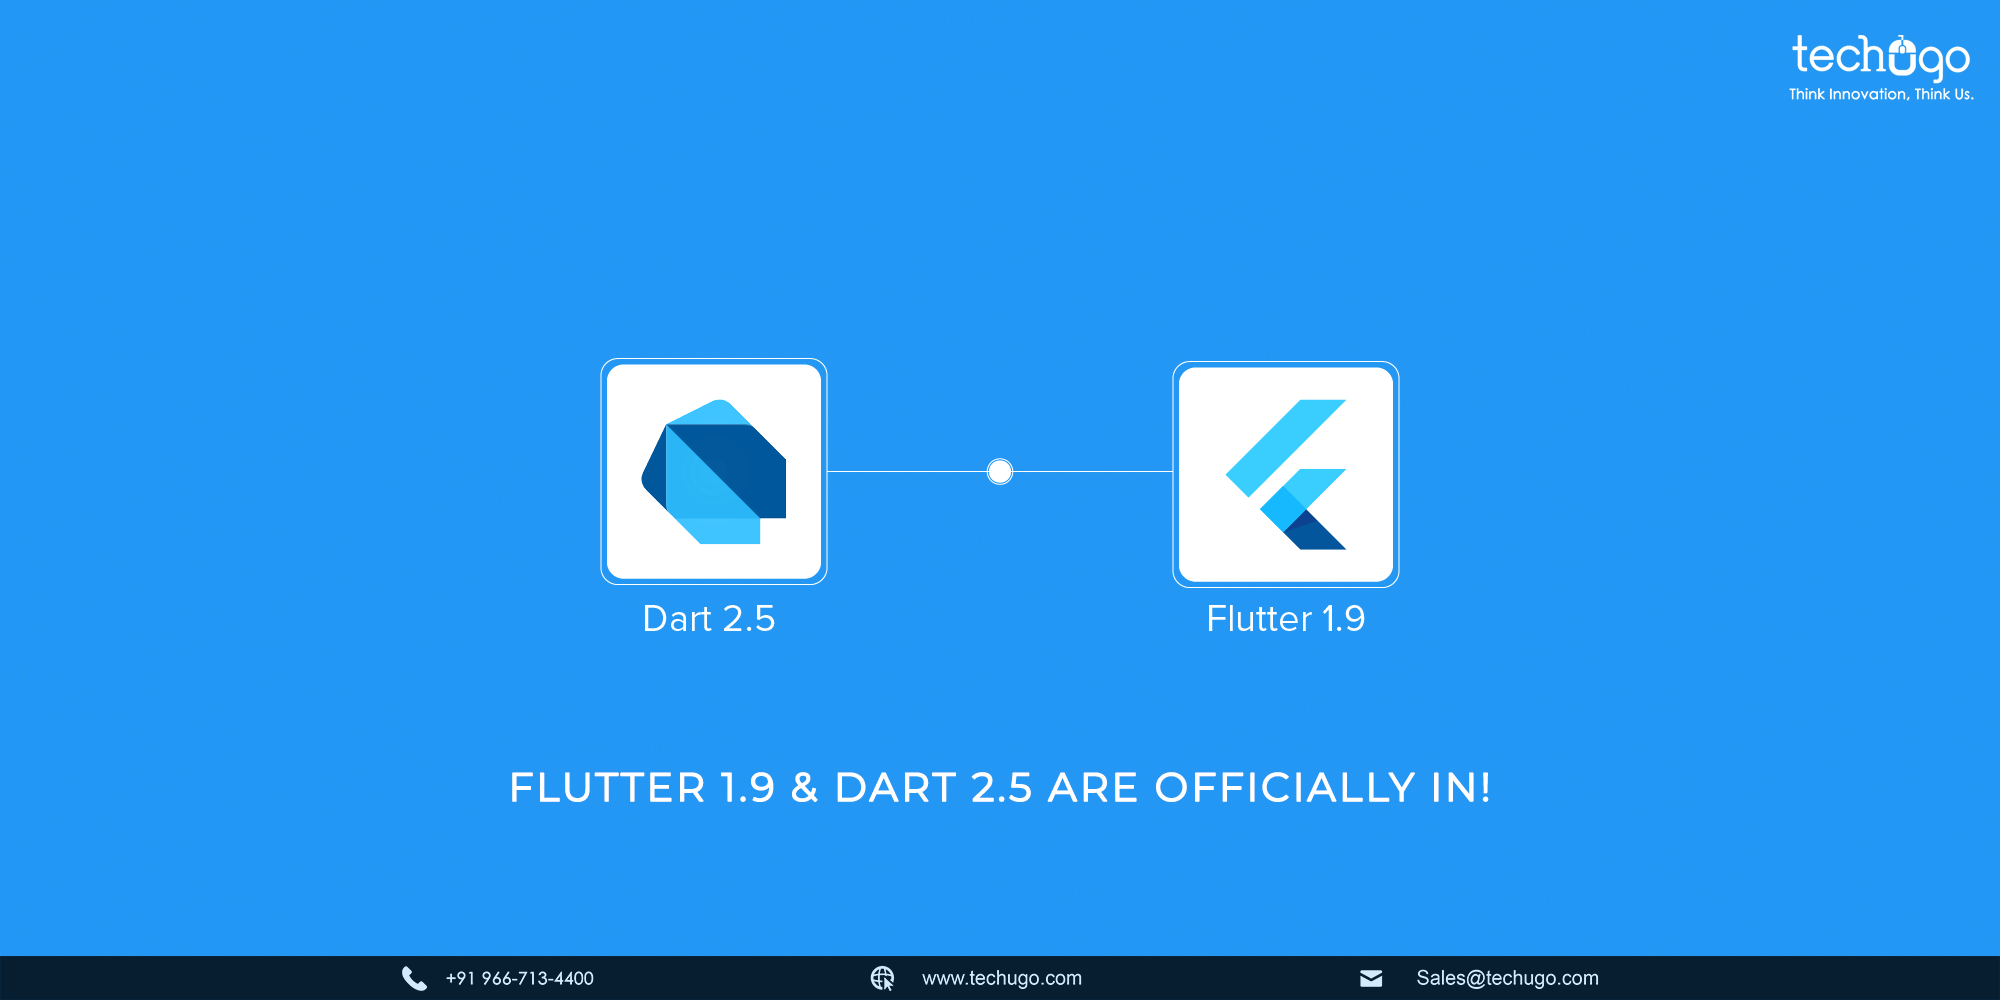 Flutter 1.9 & Dart 2.5 Are Officially In